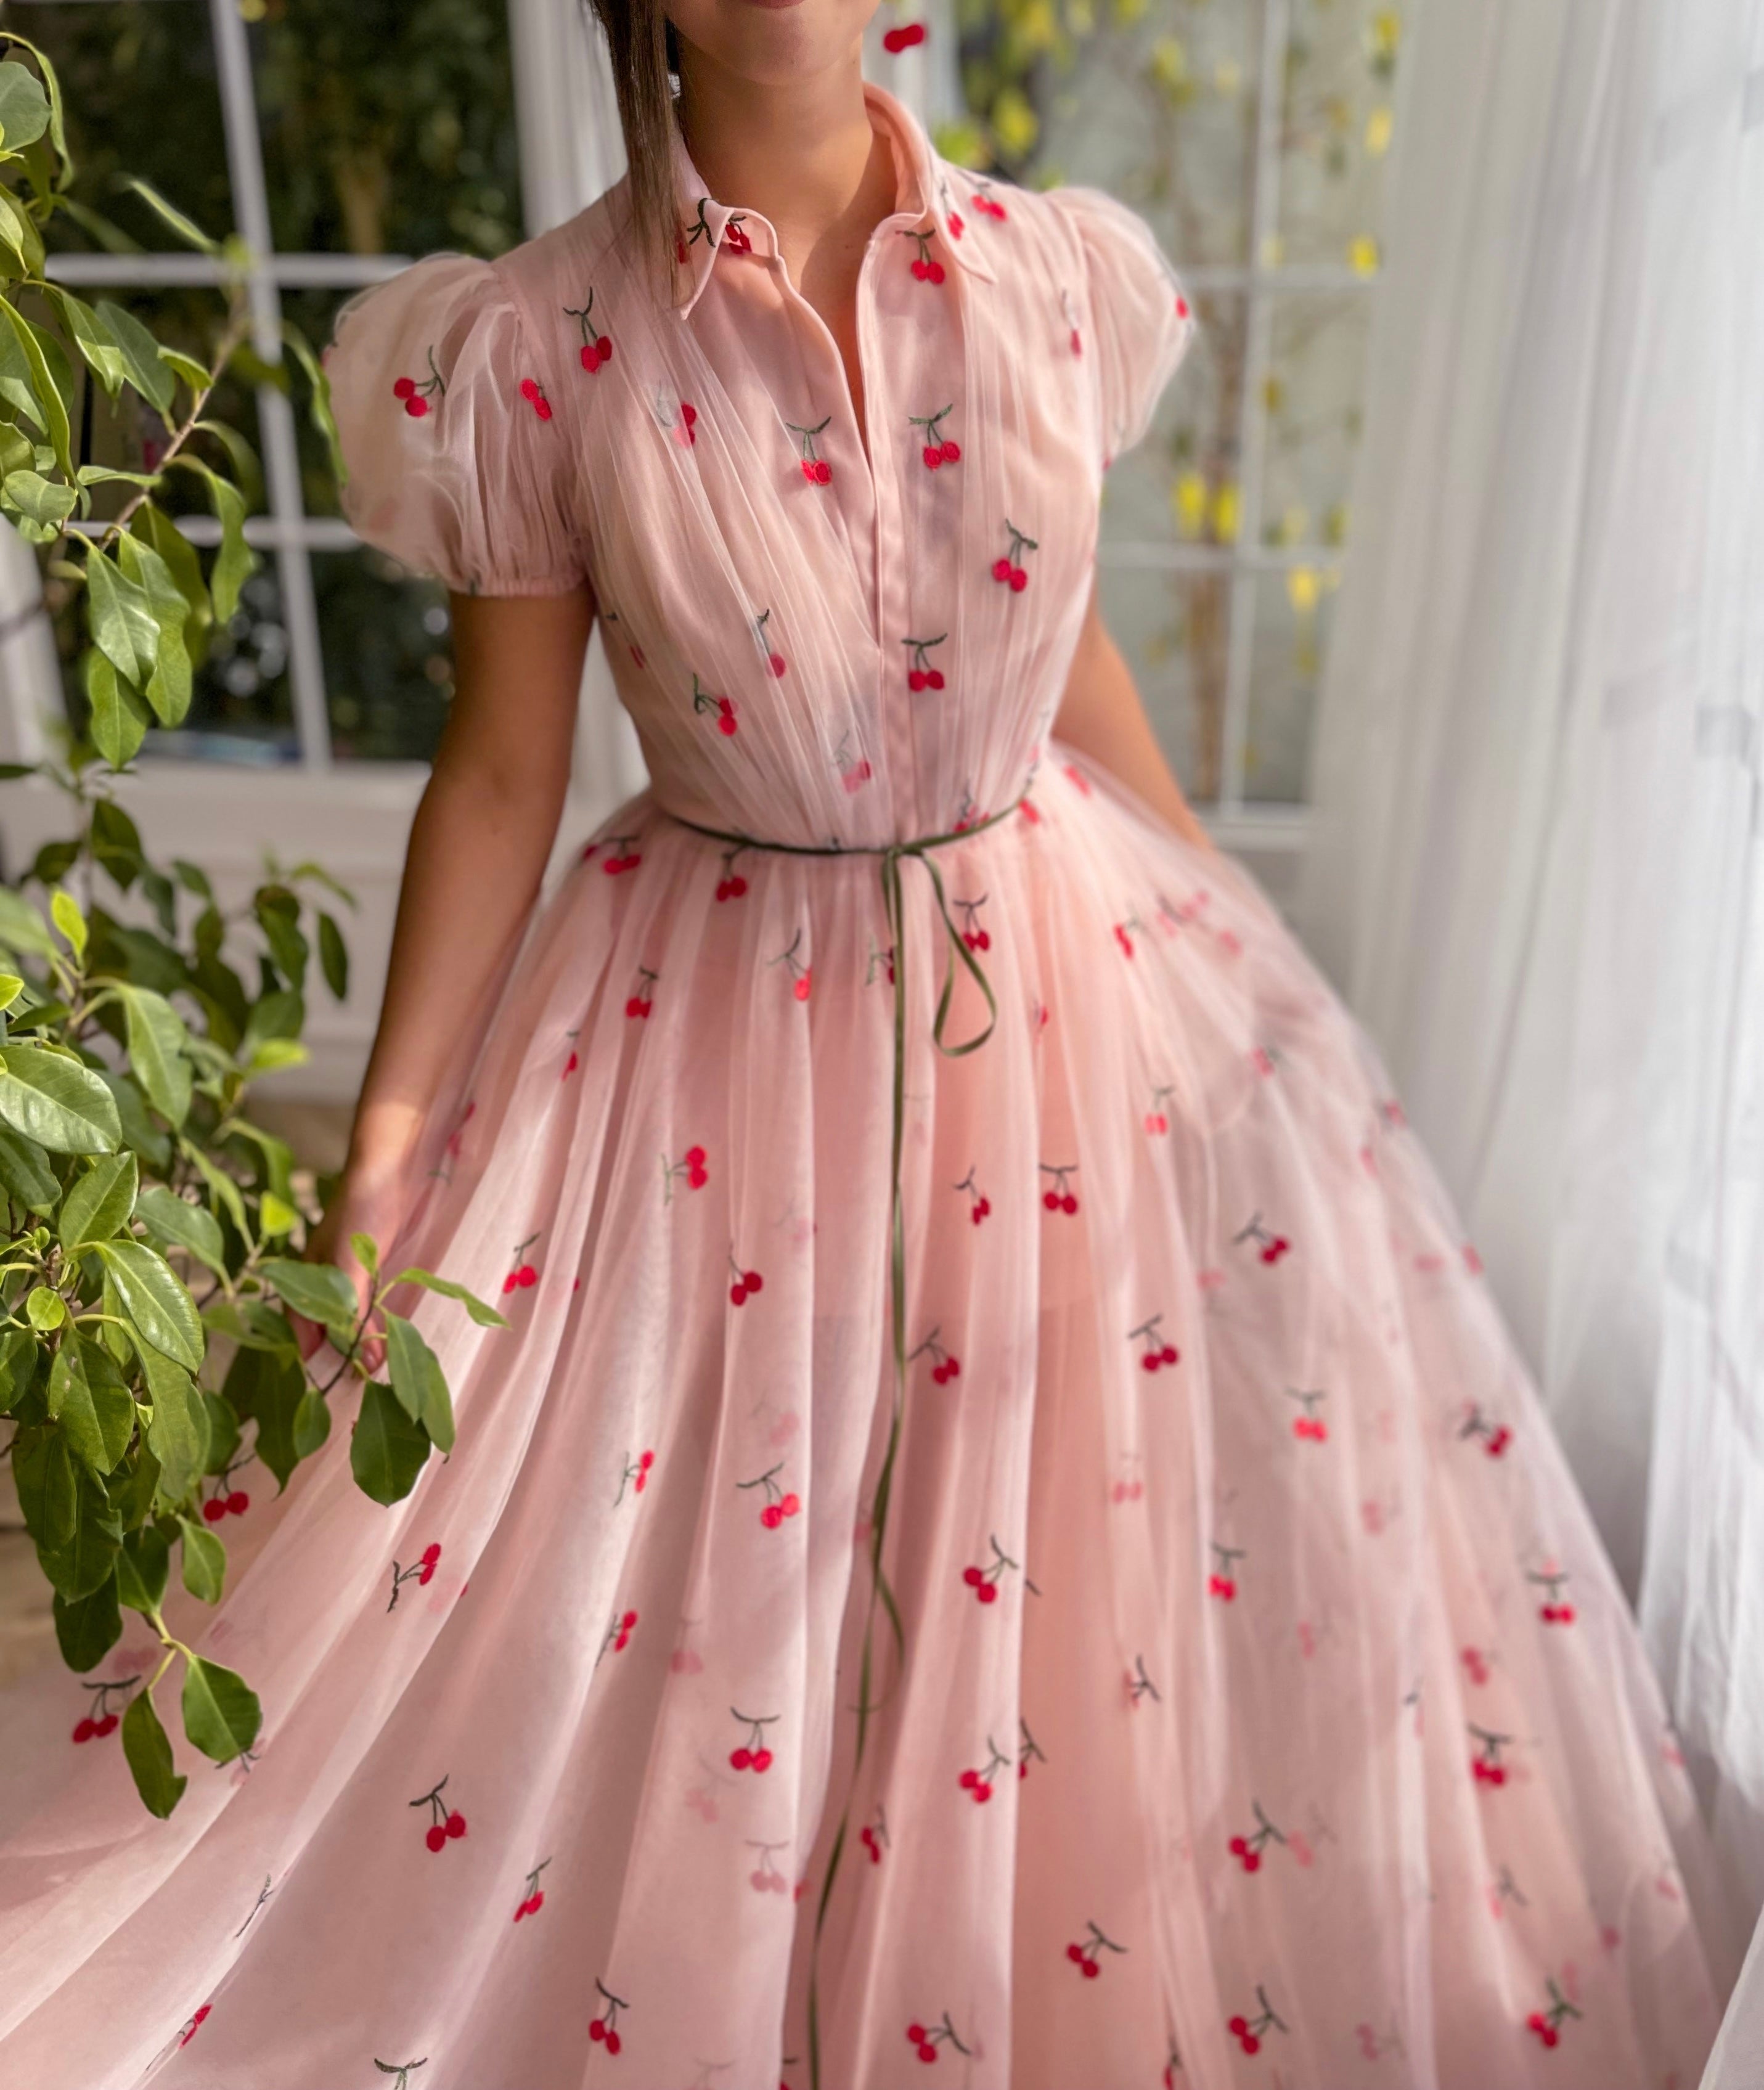 Pink A-Line dress with cherries, cap sleeves and collar top